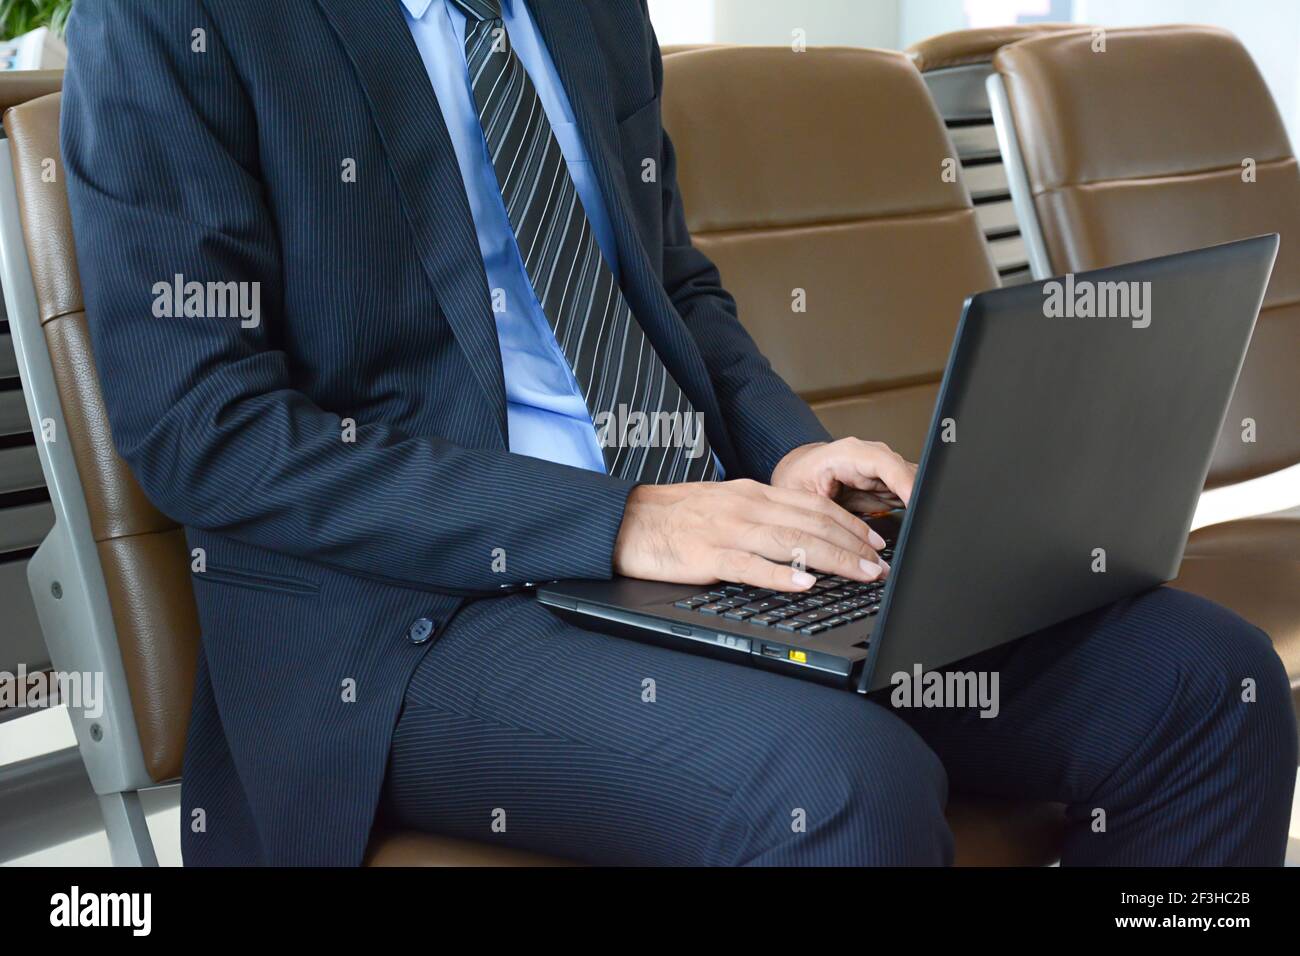 Businessman using laptop or notebook computer while sitting on the chair at the airport Stock Photo